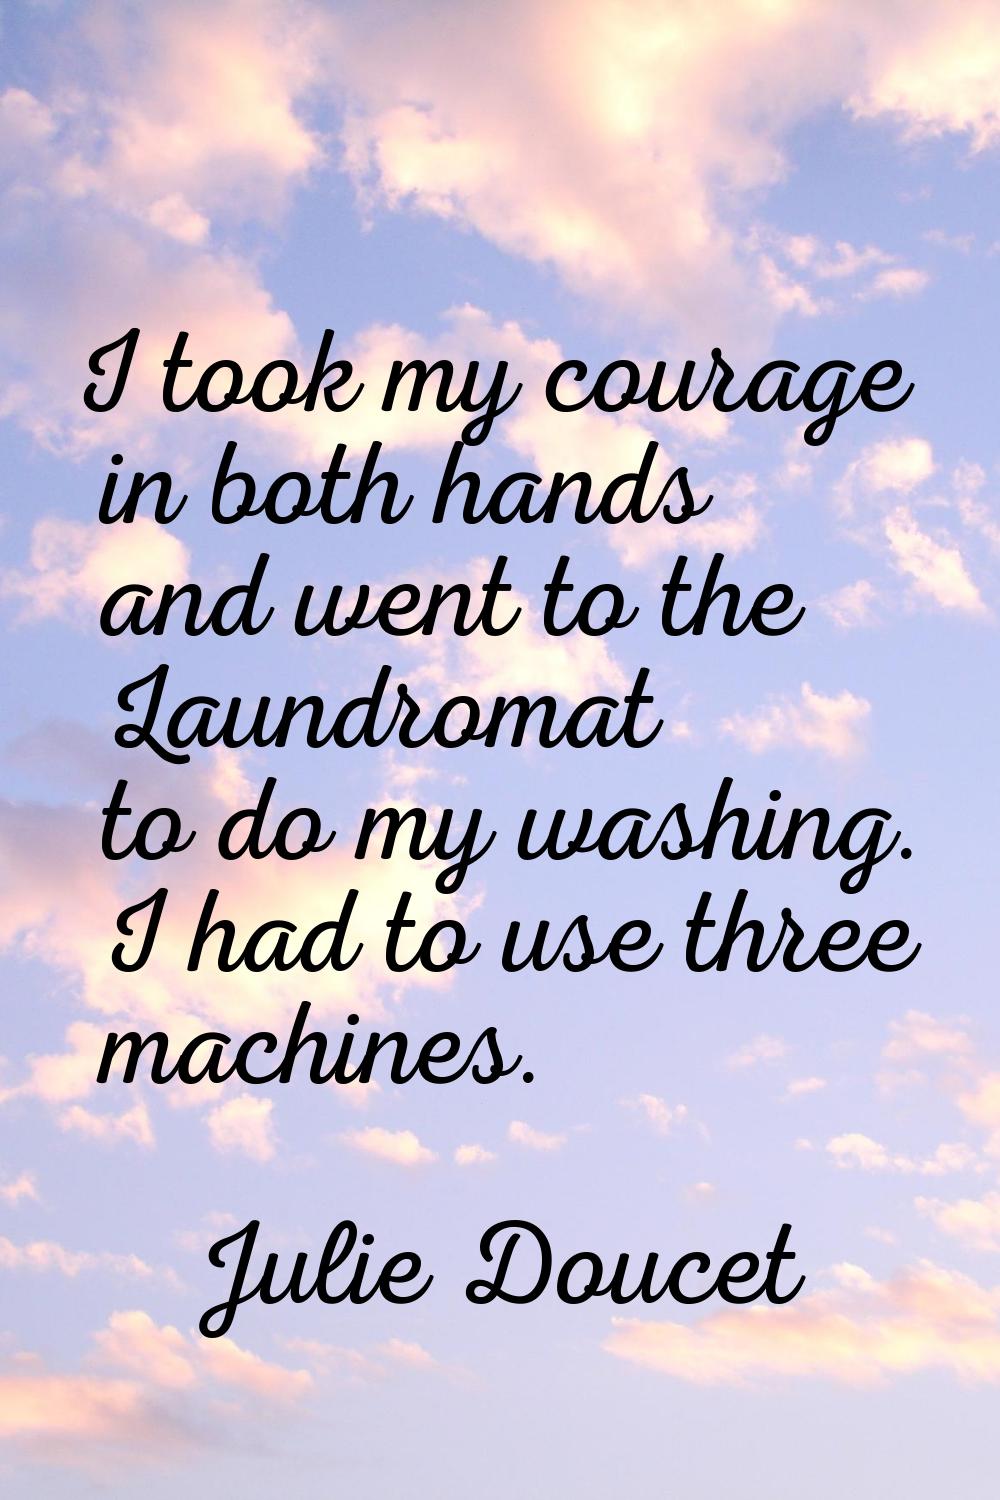 I took my courage in both hands and went to the Laundromat to do my washing. I had to use three mac